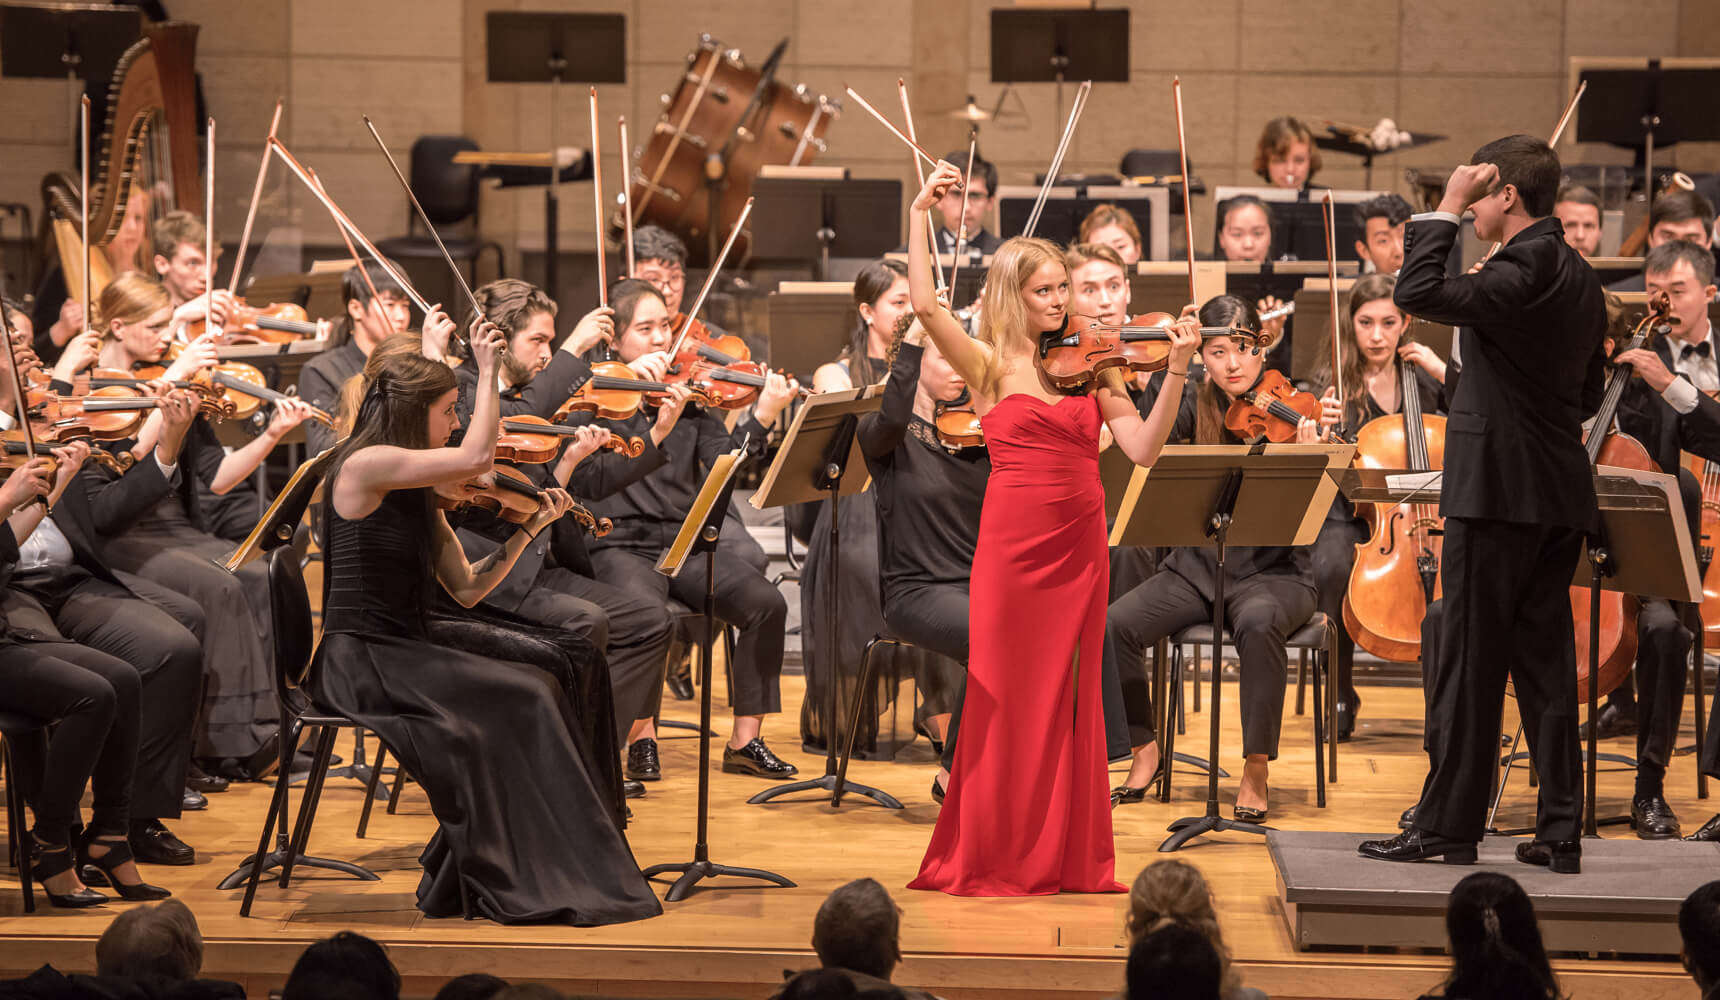 A symphony performs while a violin soloist plays in the center wearing a red dress